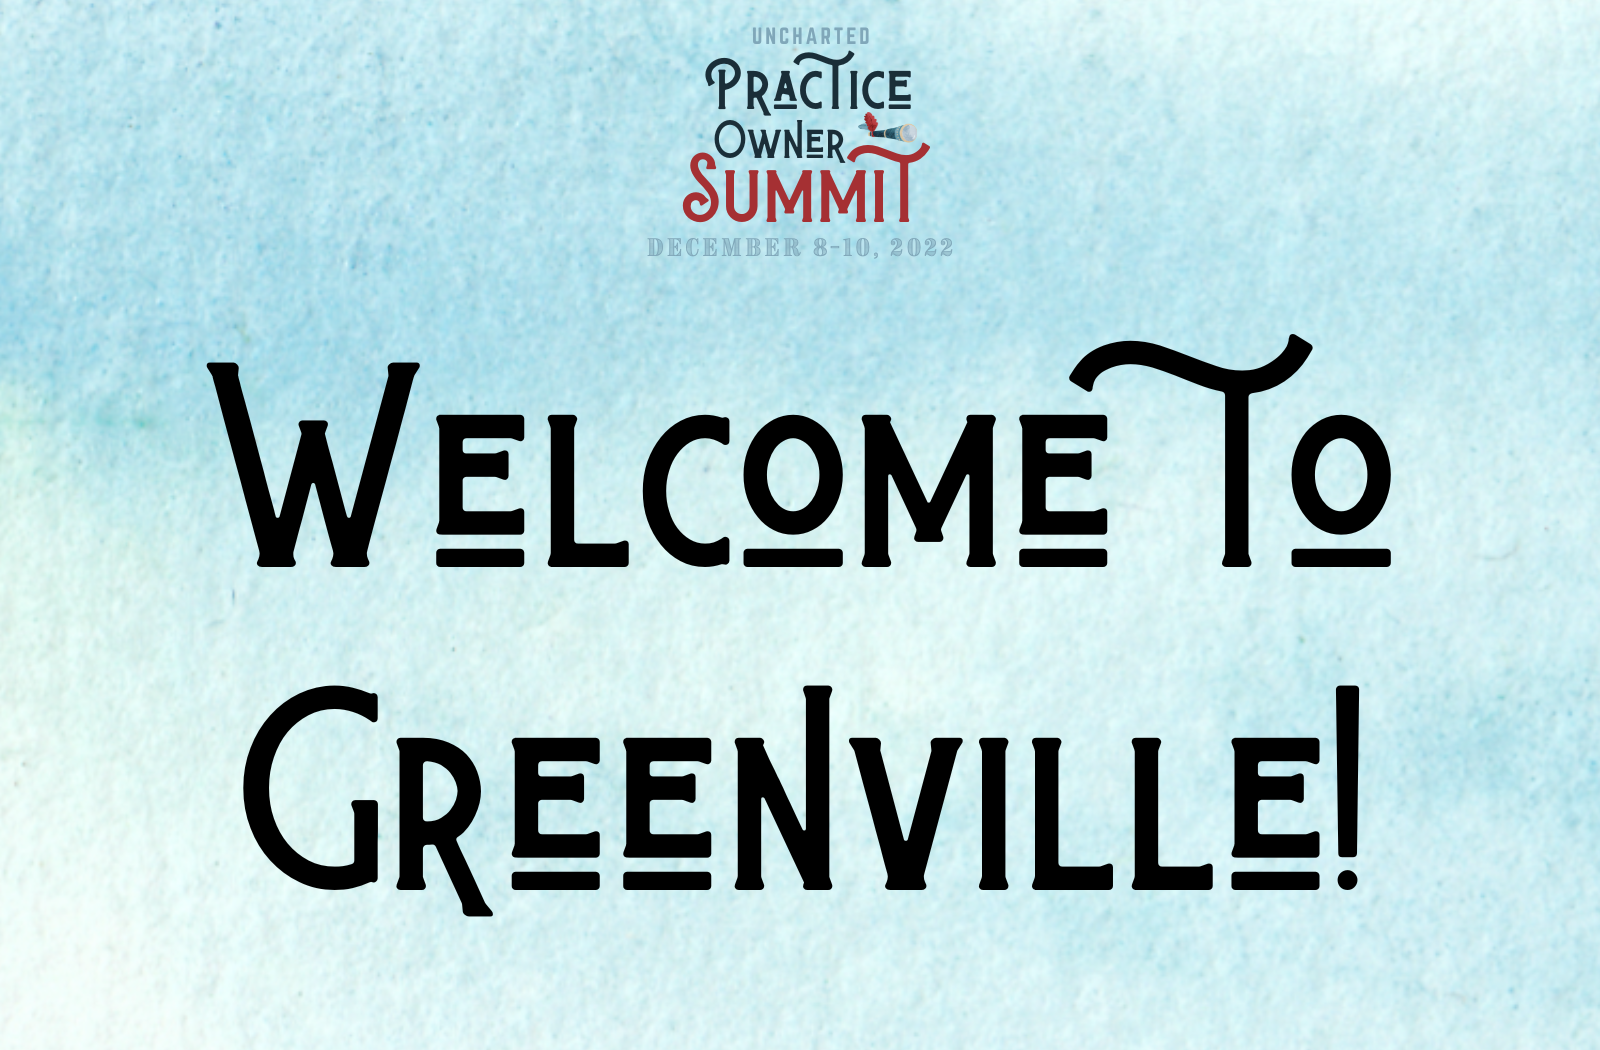 welcome to greenville image